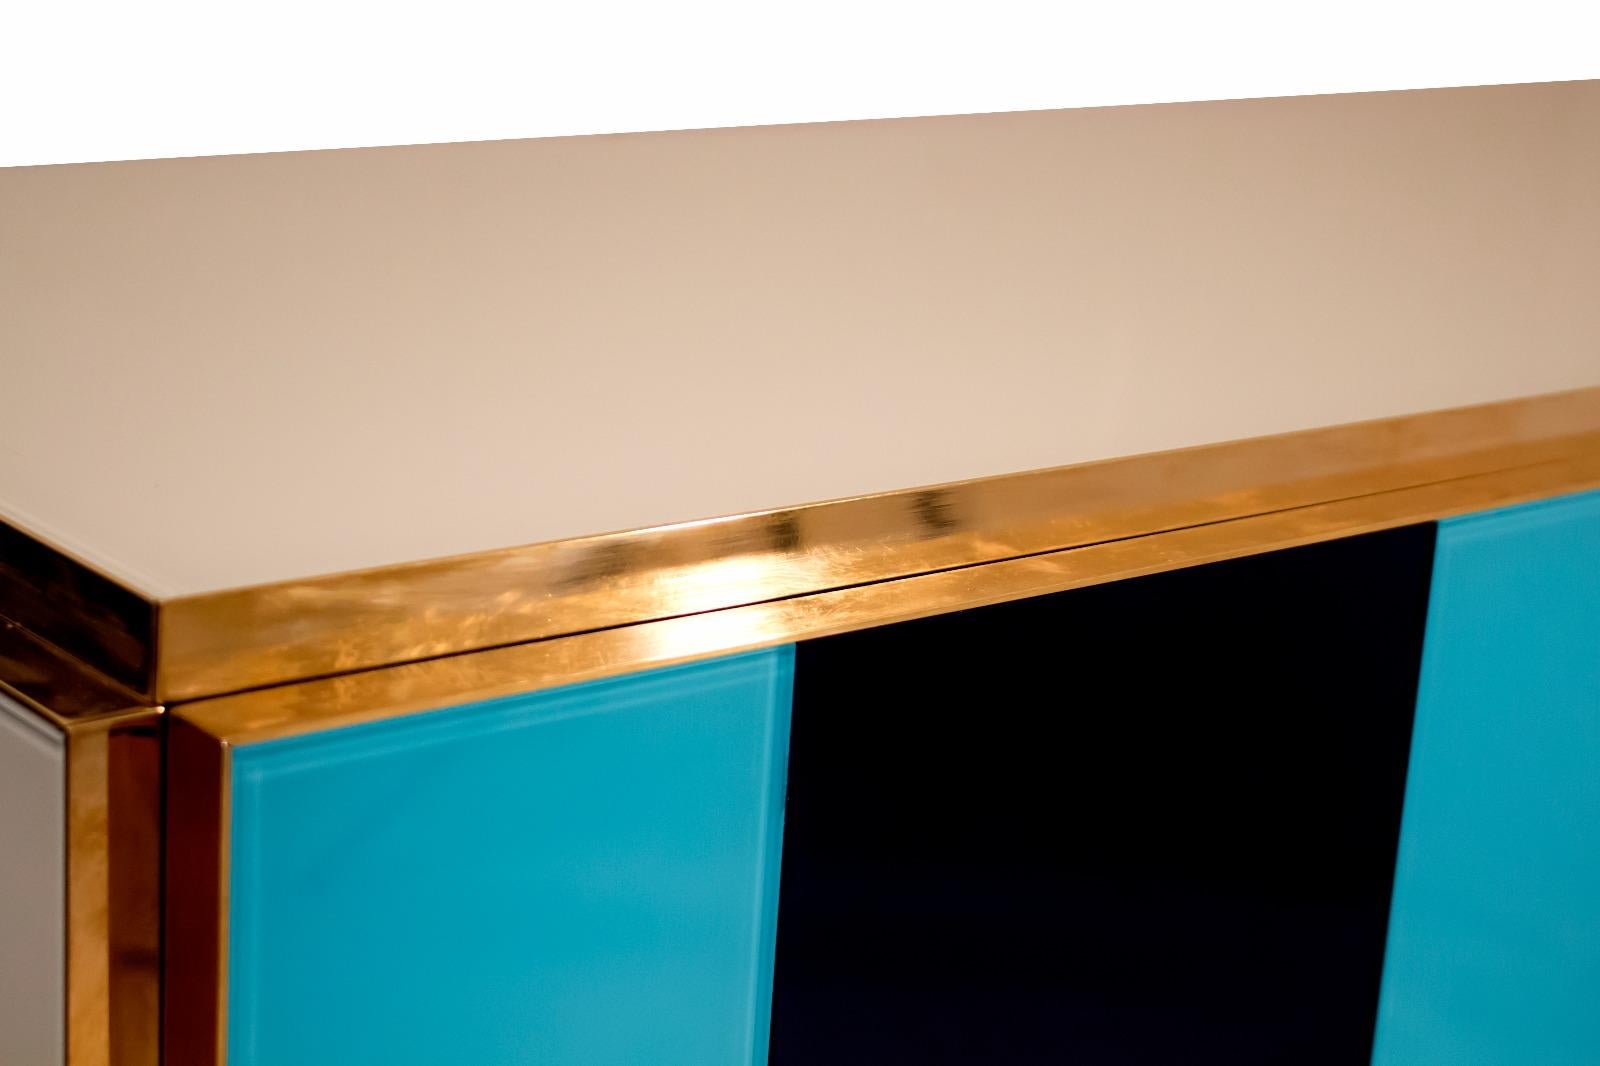 Colored glass sideboard

Brass base and details

Postmodern mix of colors

Contemporary,

Italy.